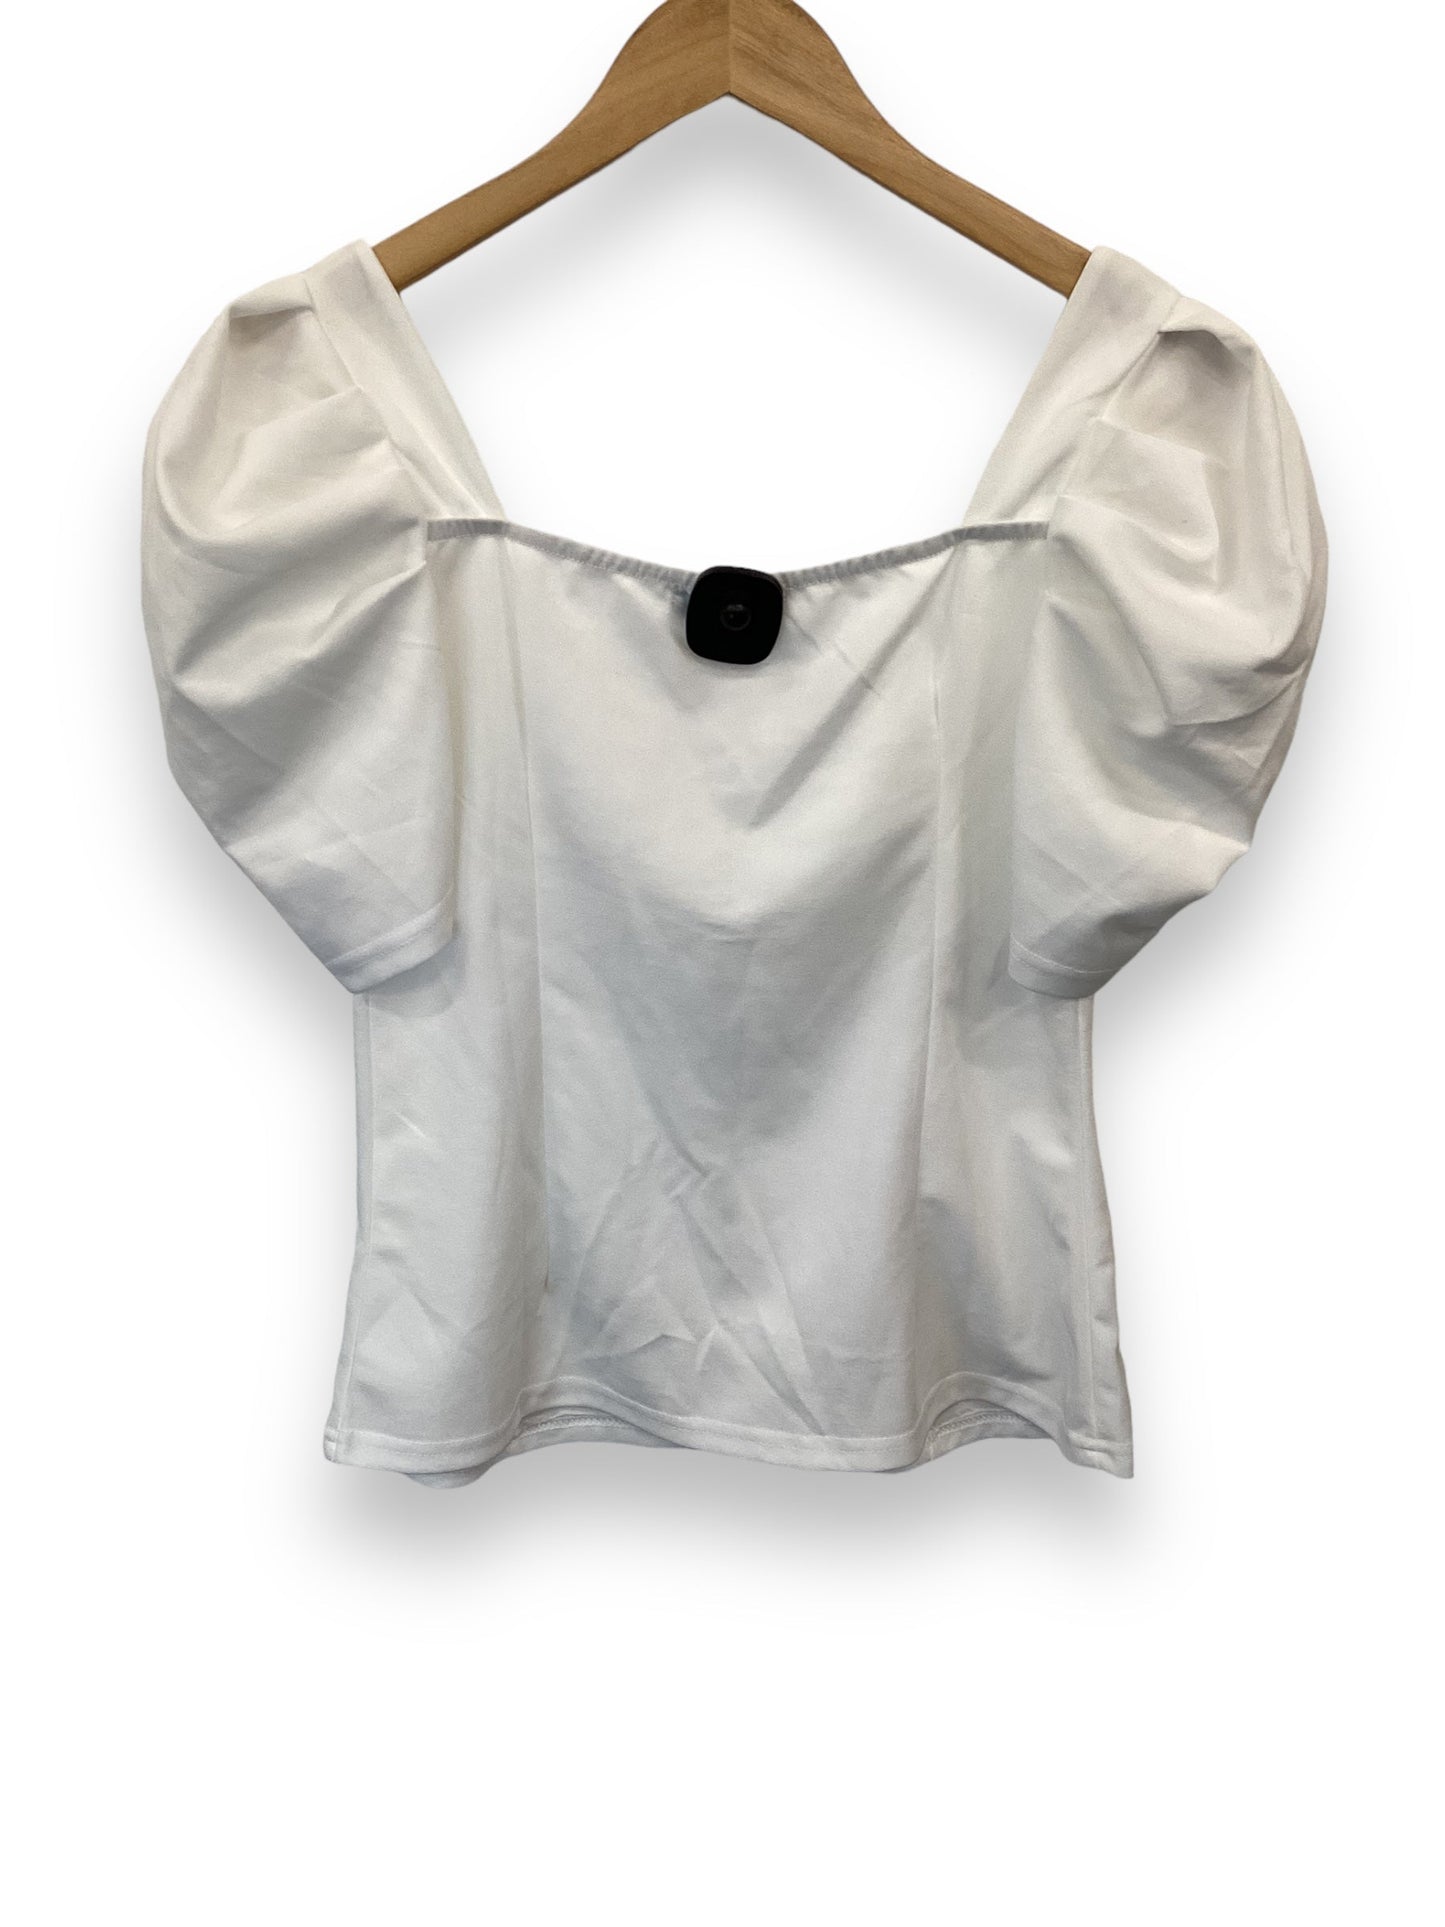 Top Short Sleeve Basic By Clothes Mentor  Size: Xl